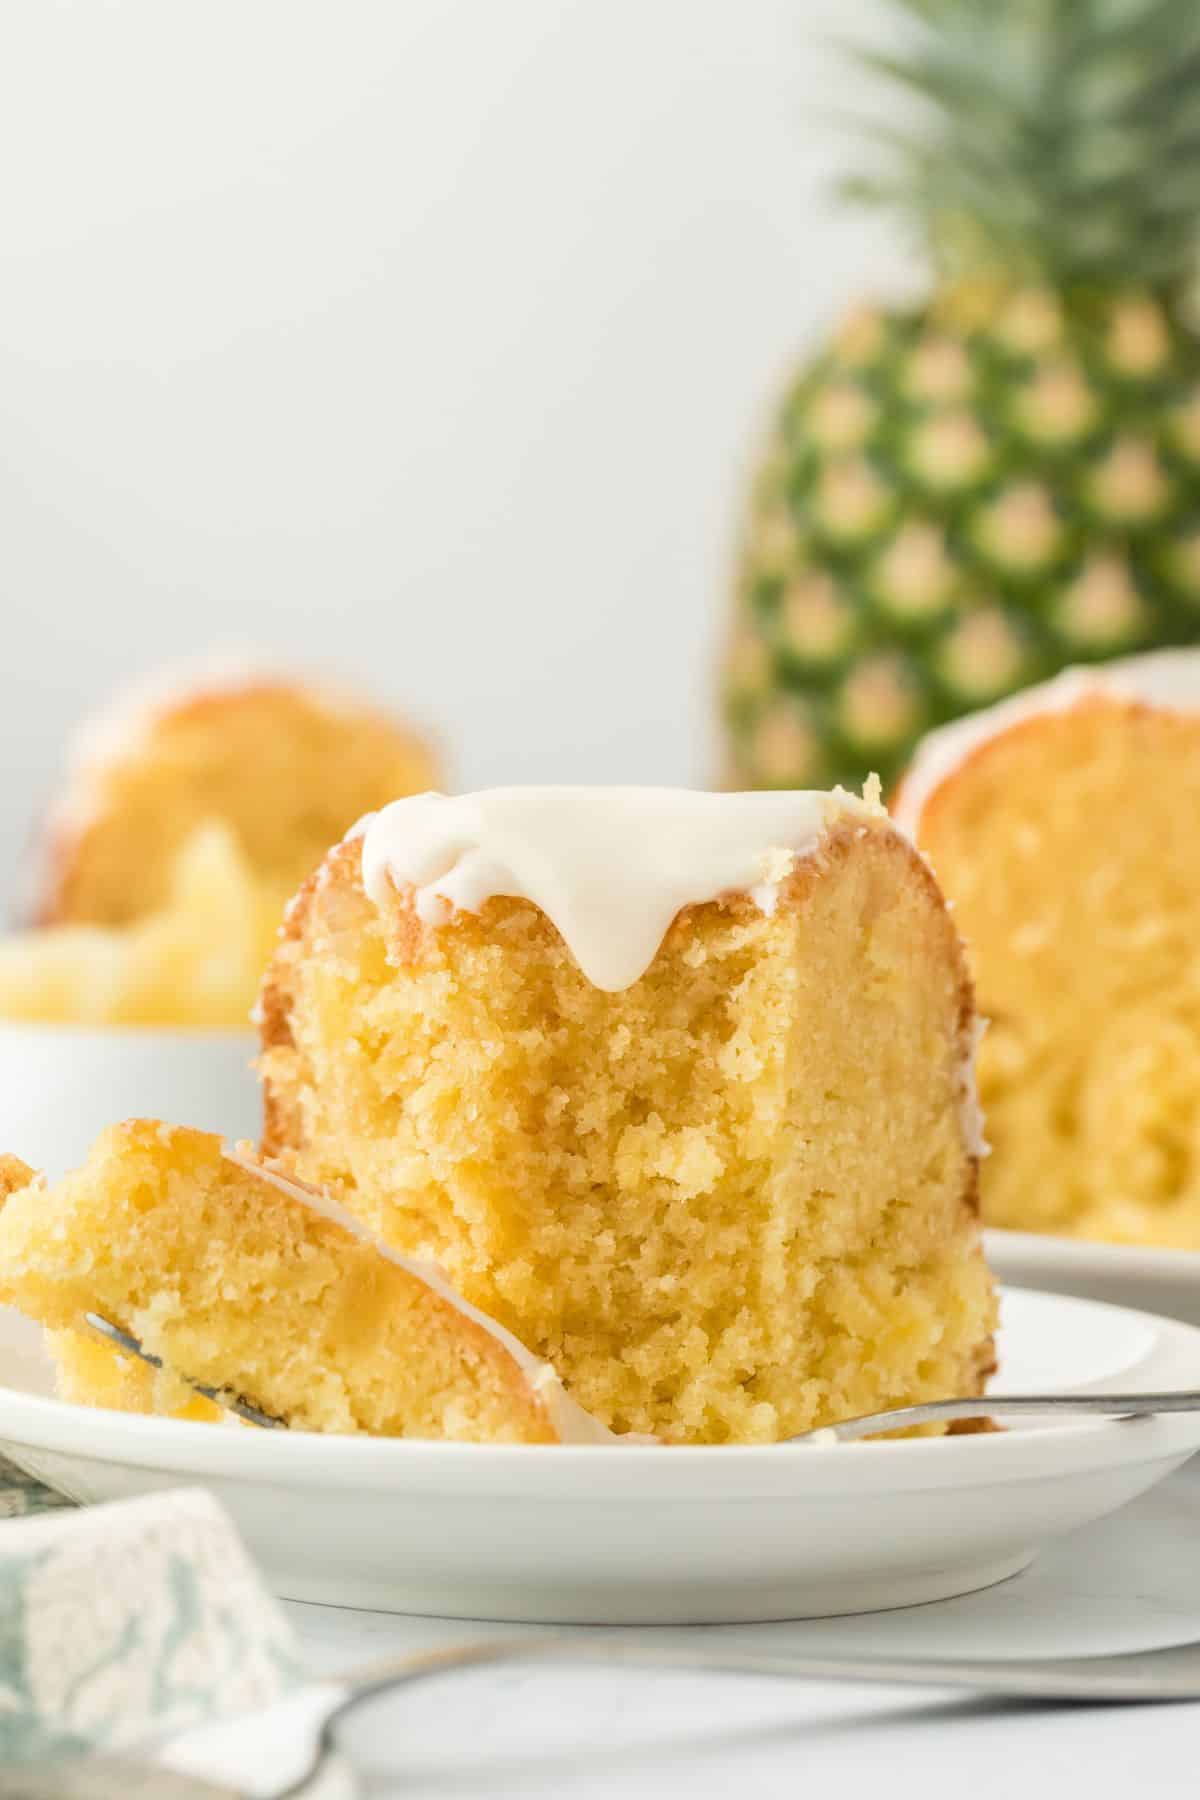 A slice of pineapple pound cake on a white plate with a fork, showing its moist interior and glaze, with a whole pineapple and more cake in the background